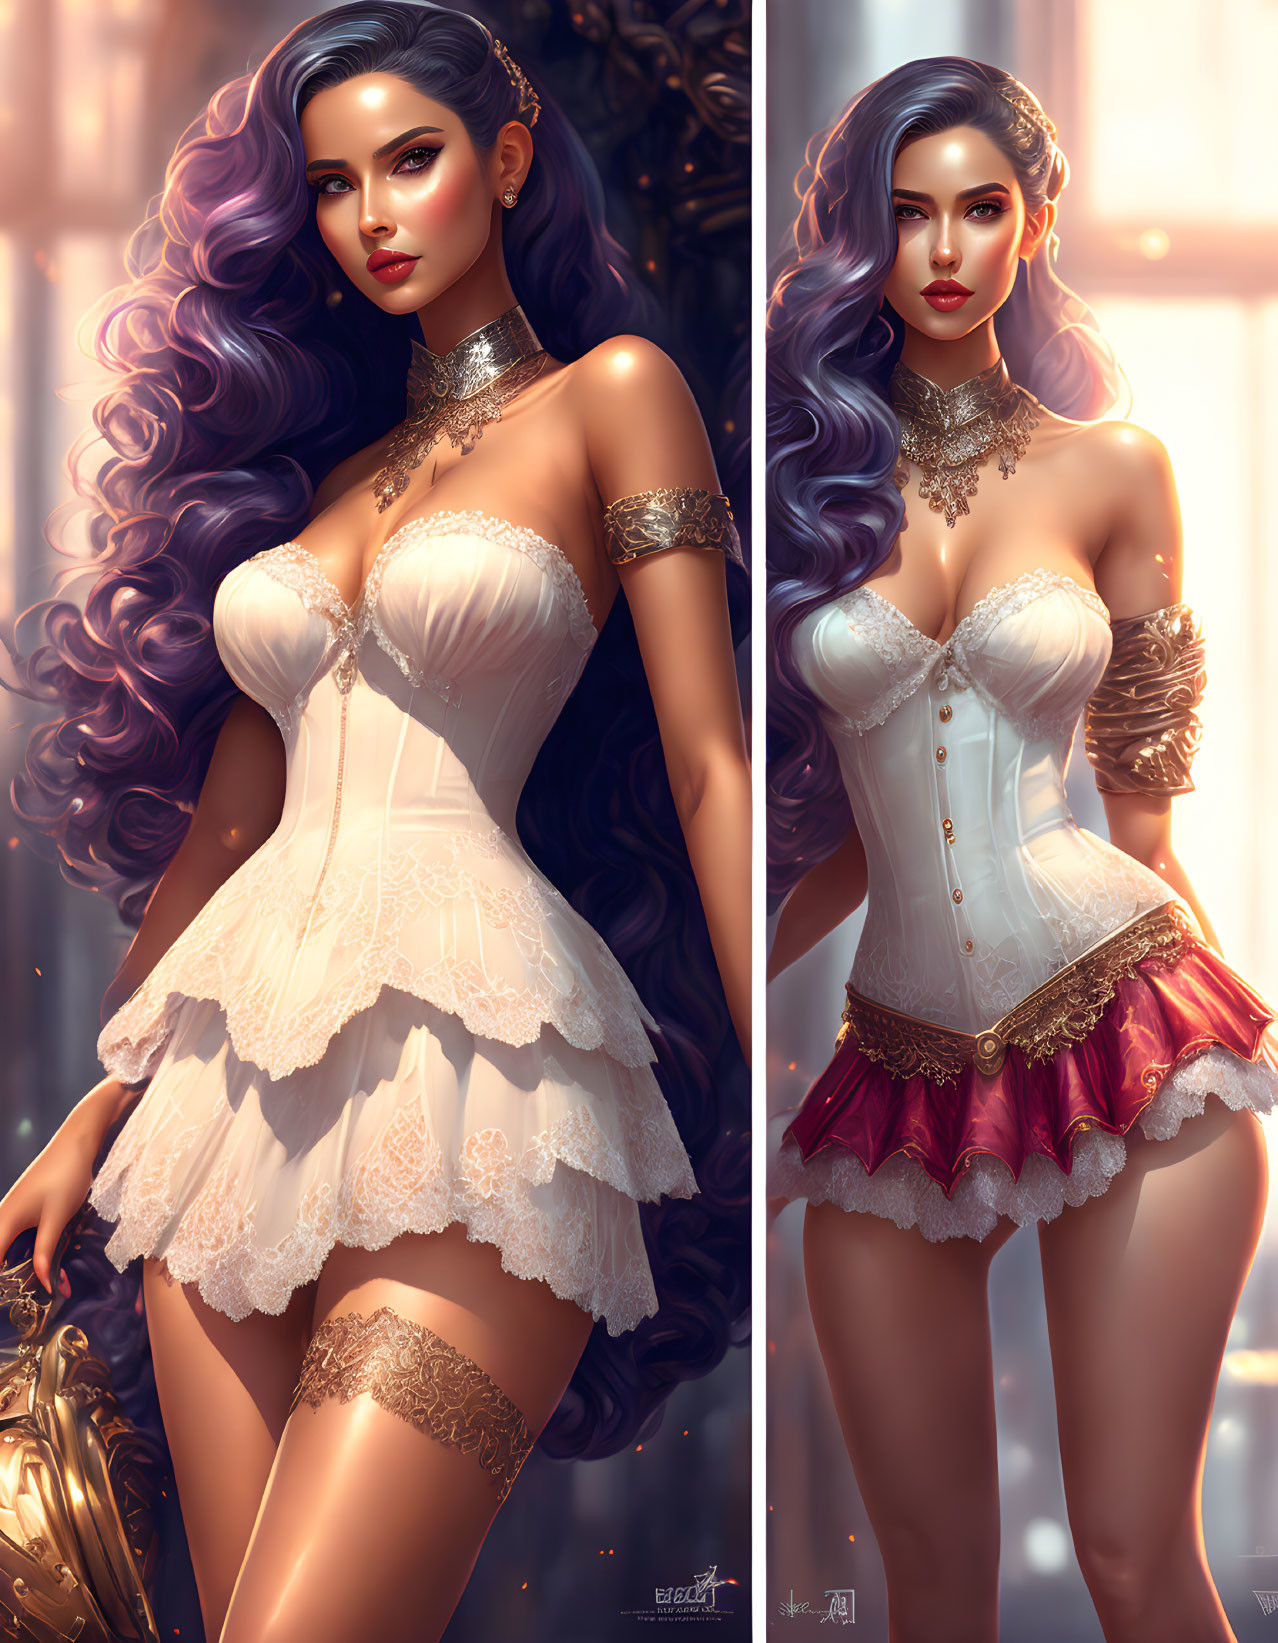 Purple-haired woman in corset dress: Two styles with lace and jewelry on warm background